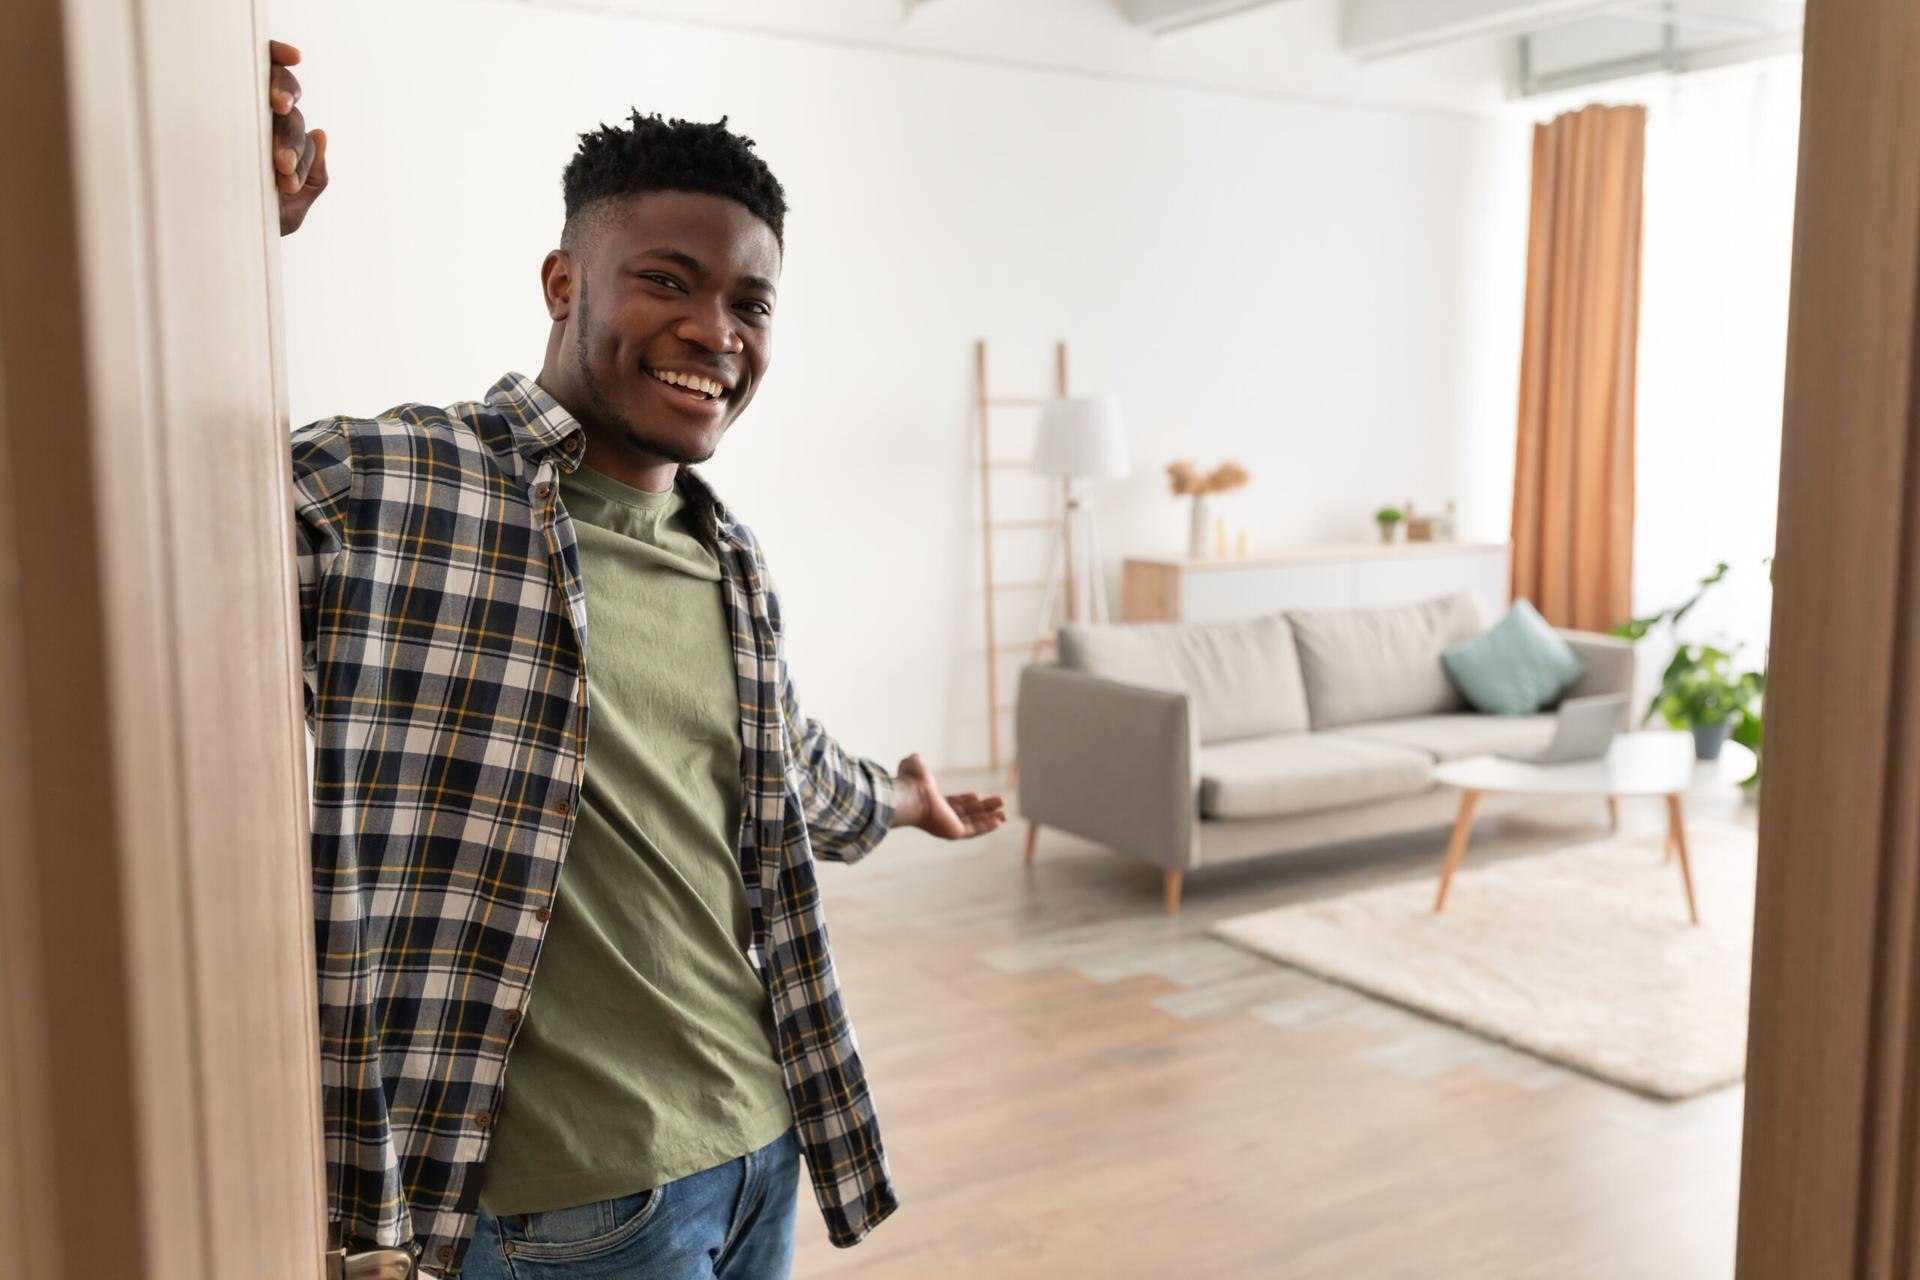 6 Things To Consider When You Rent a Room in a House